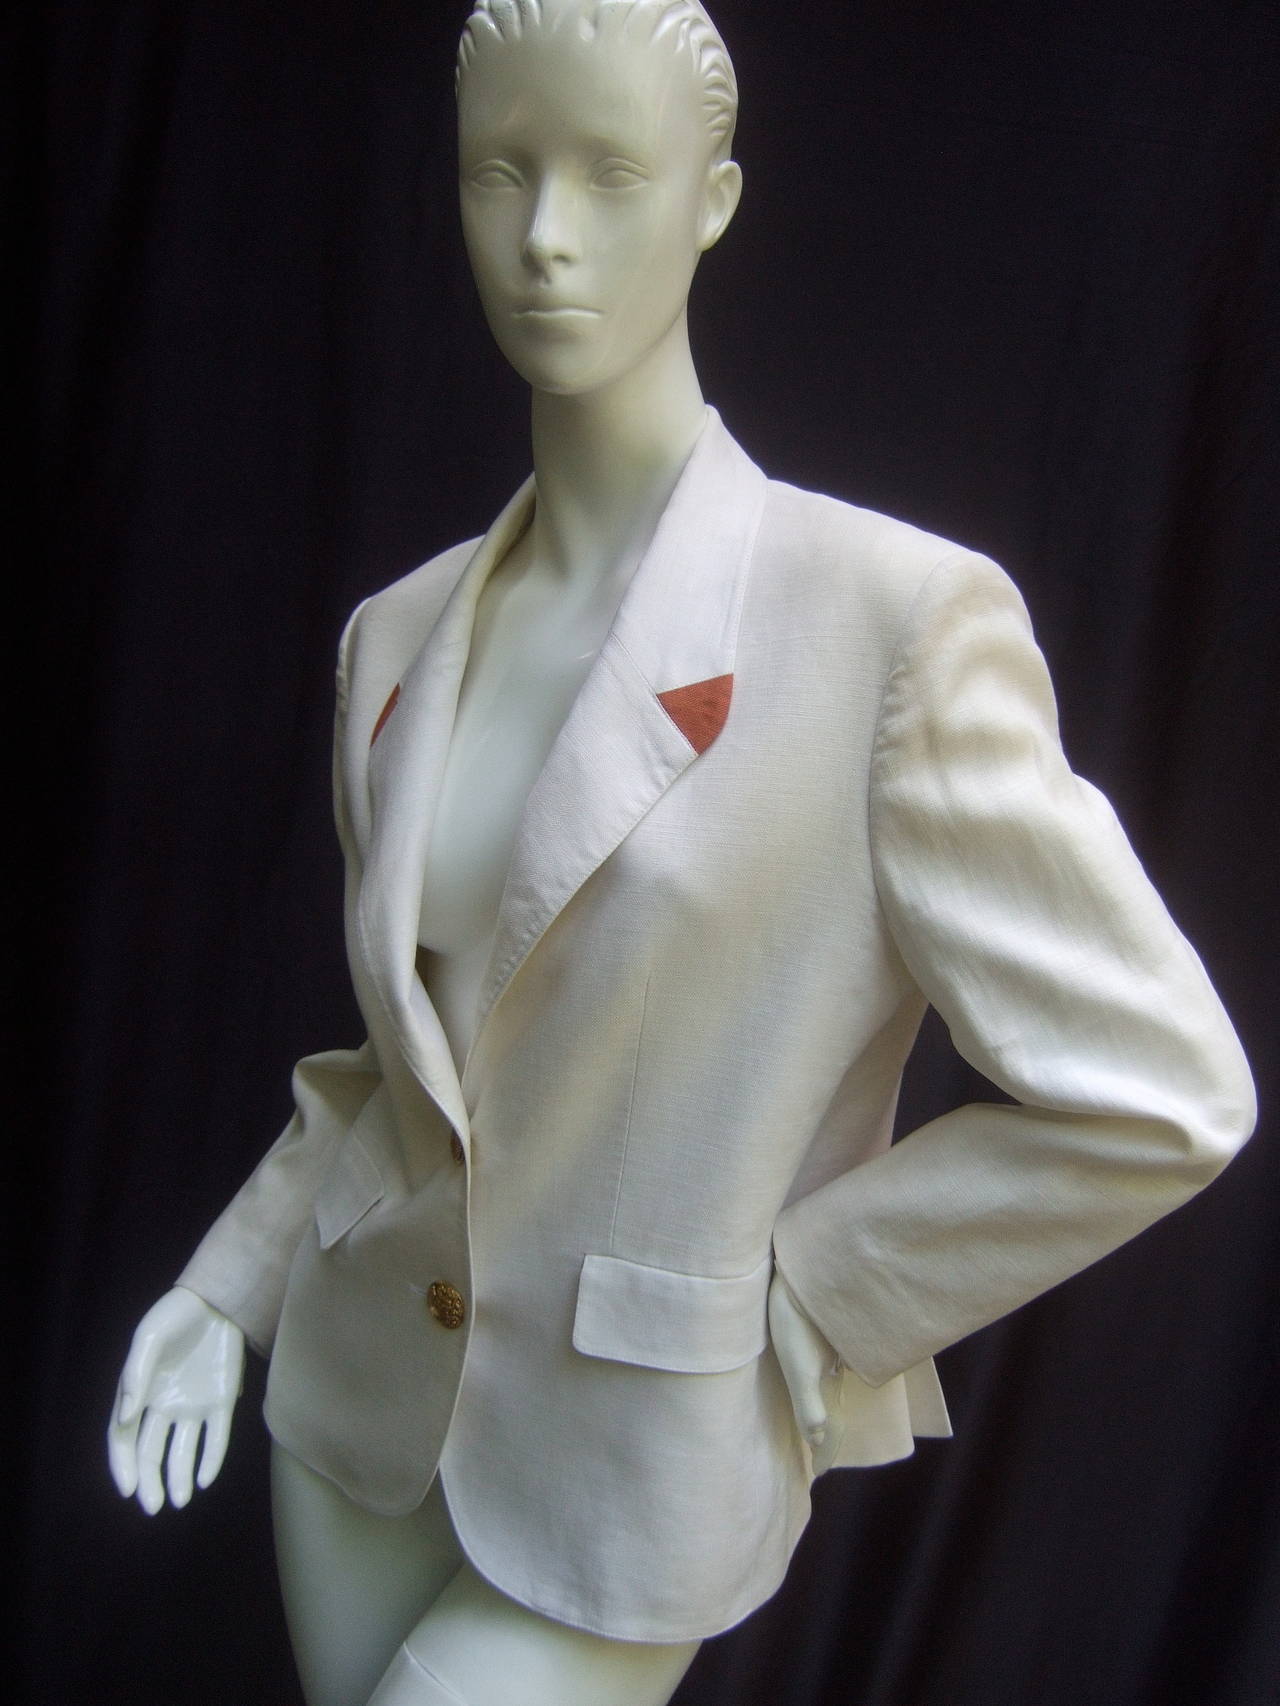 Hermes Paris Crisp white linen jacket Made in France 
The classic high fashion linen jacket is accented
with copper linen triangular panels on the lapels

The chic linen jacket is adorned with two large
gilt metal insignia buttons with Hermes